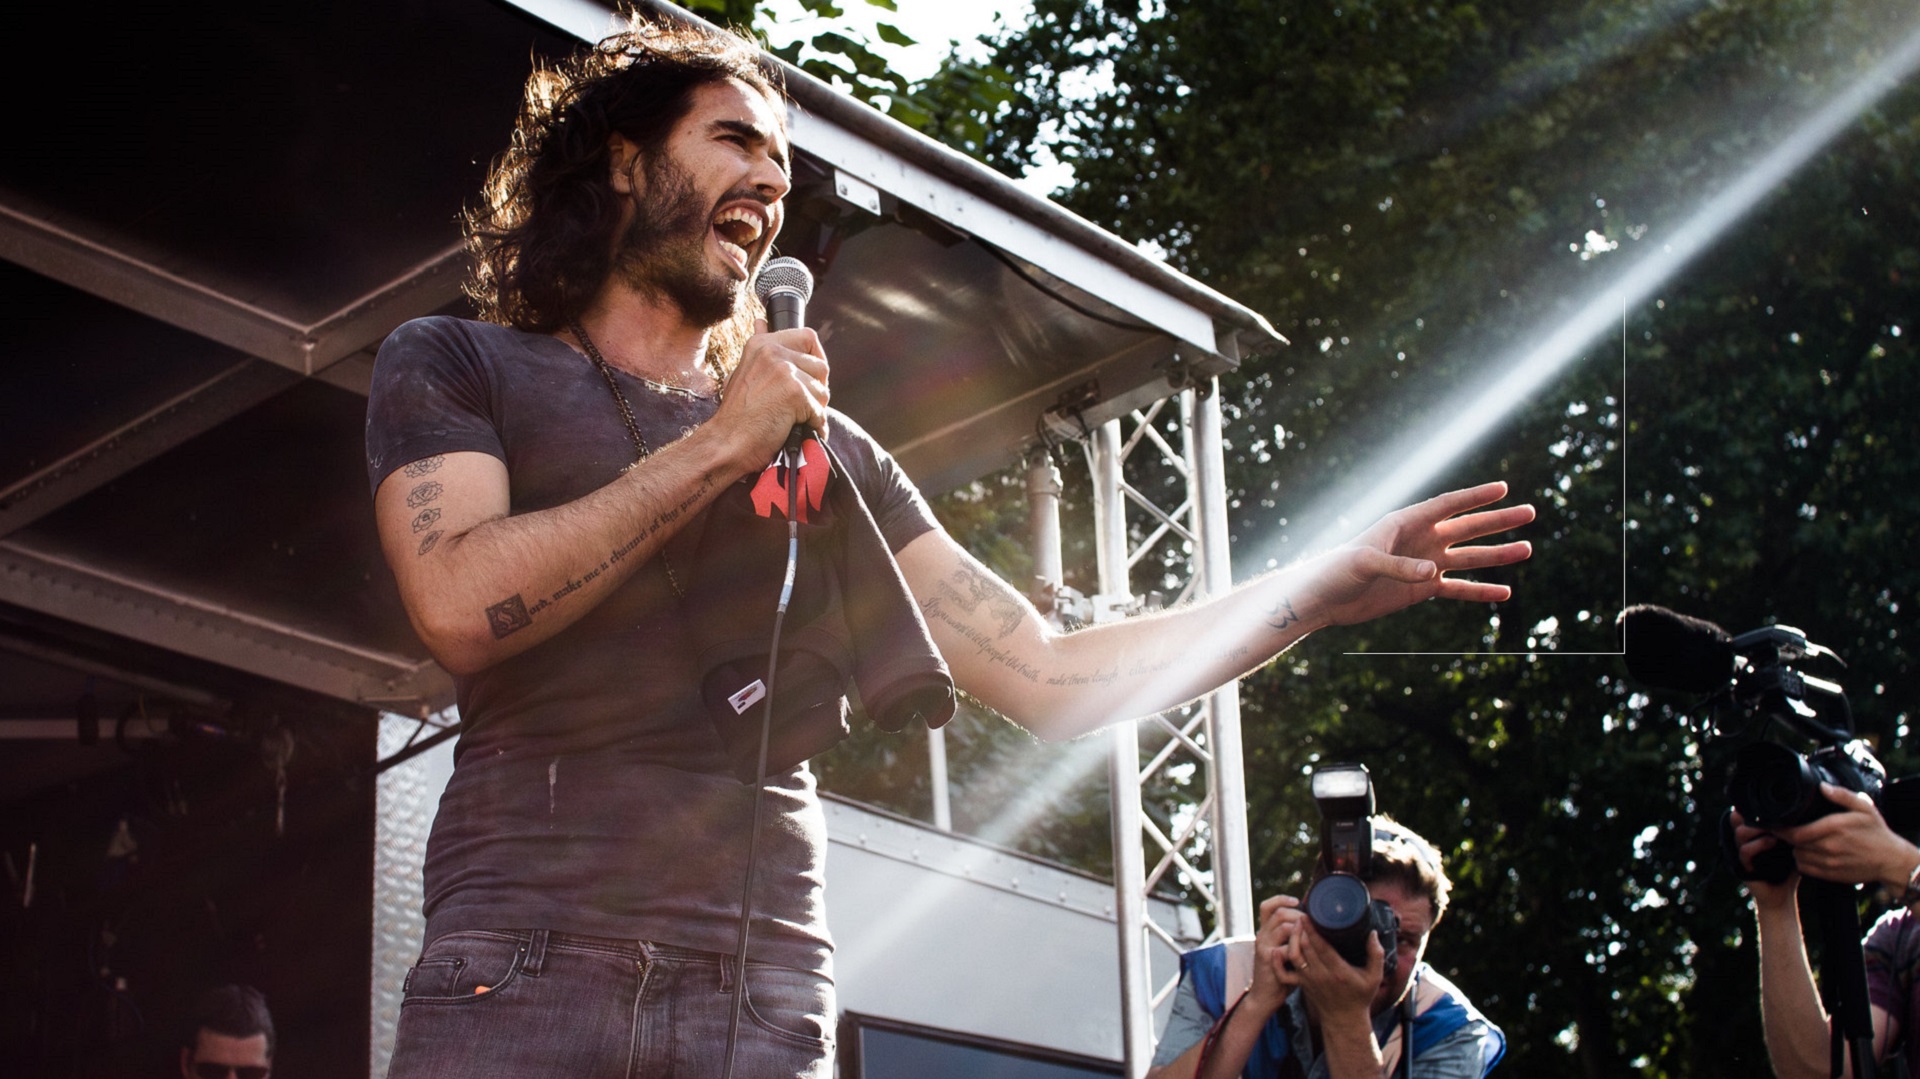 Russell Brand addressing People's Assembly Against Austerity rally